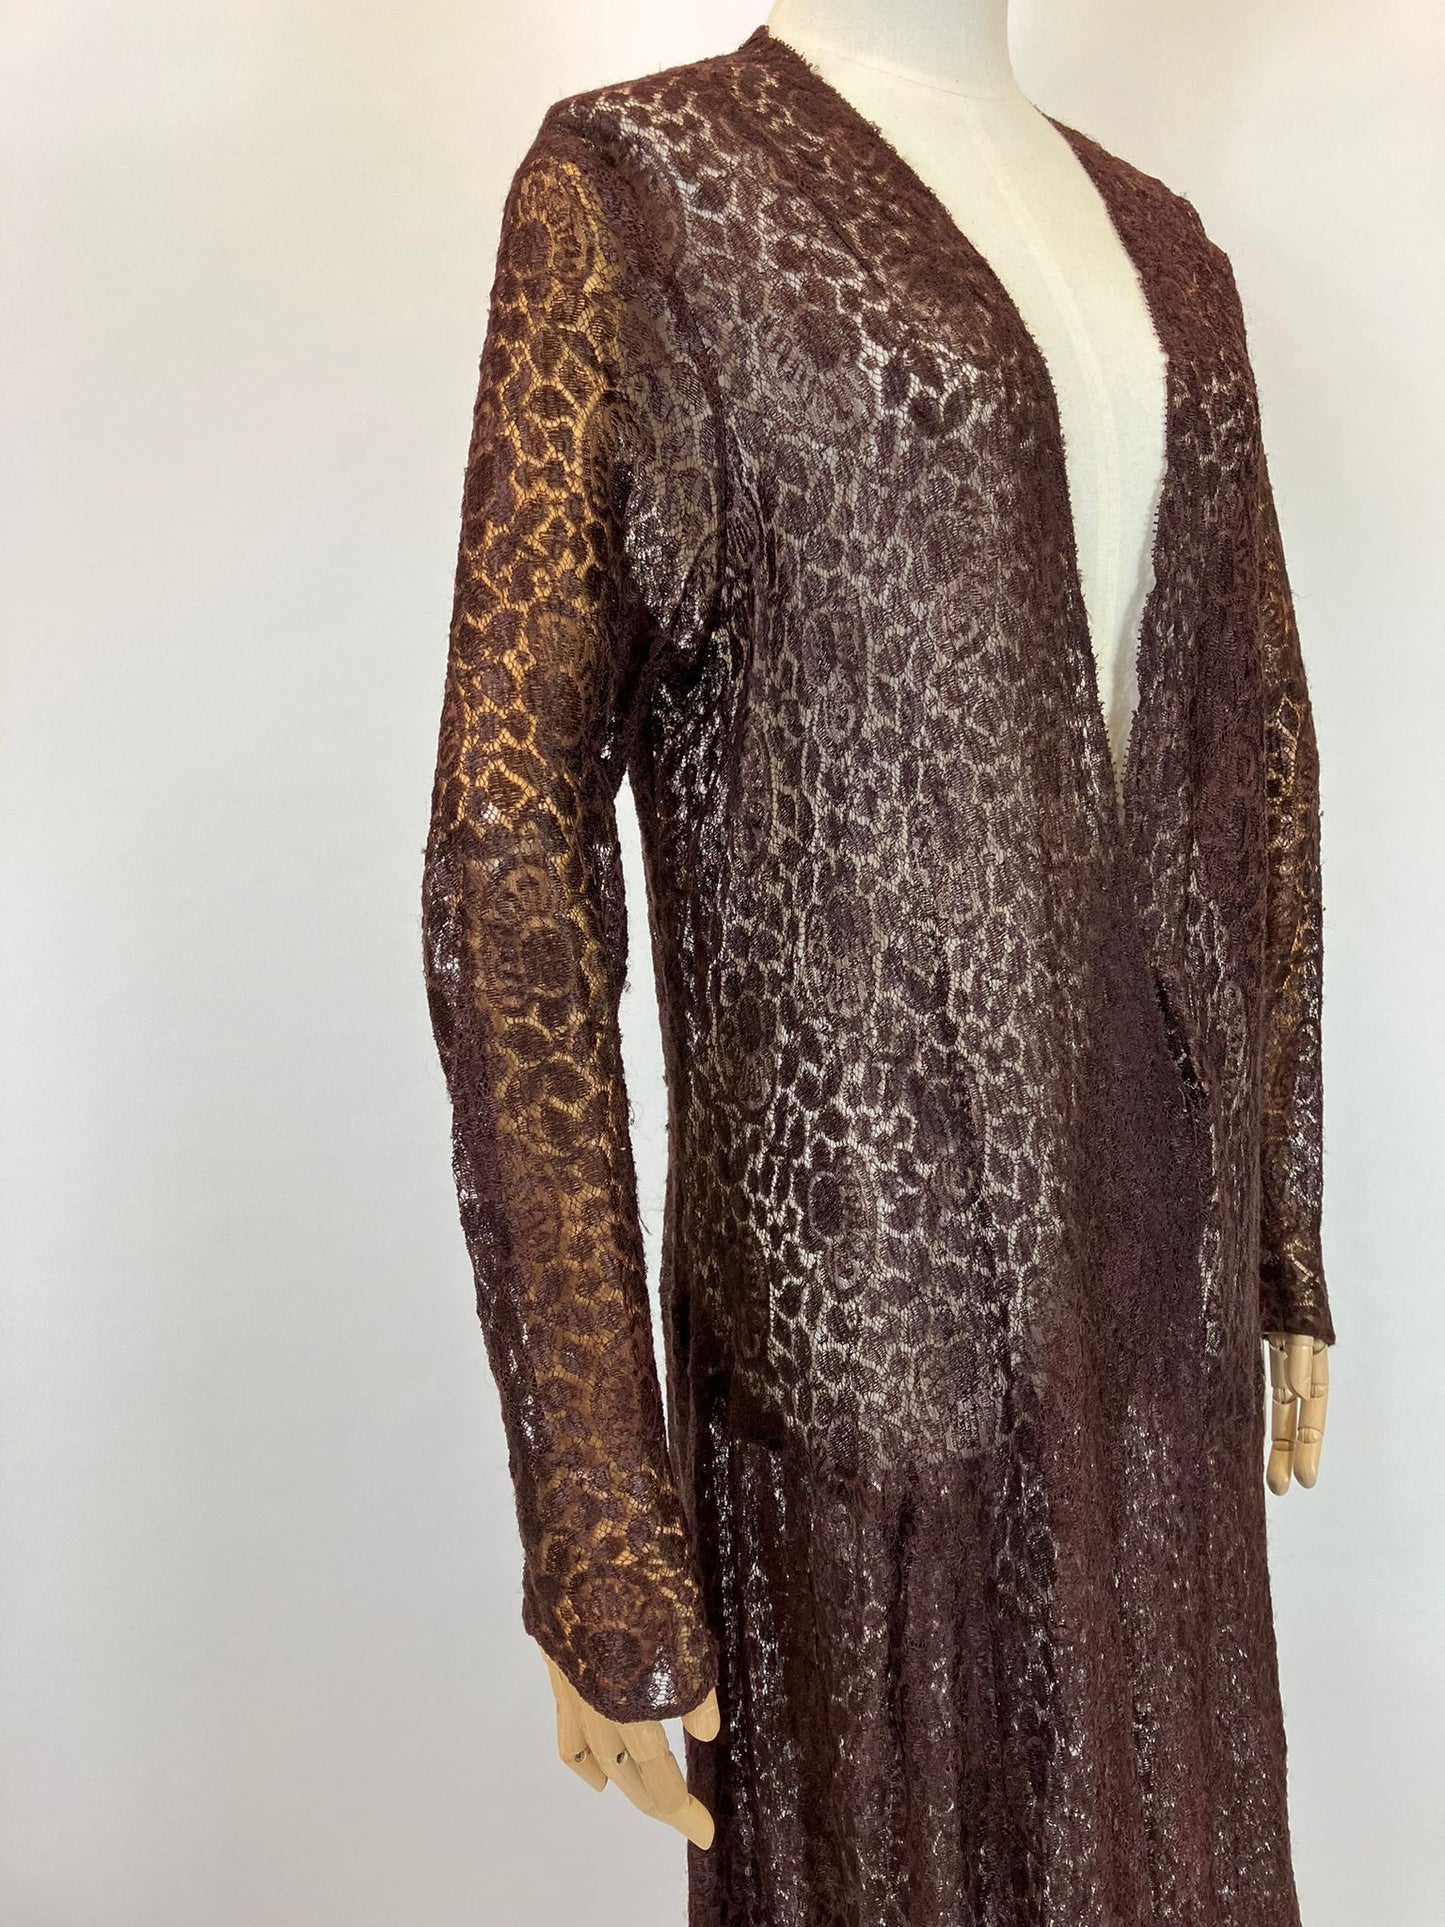 Original 1920's/ 1930's Crossover Lace Dress - in Gorgeous Deep Brown